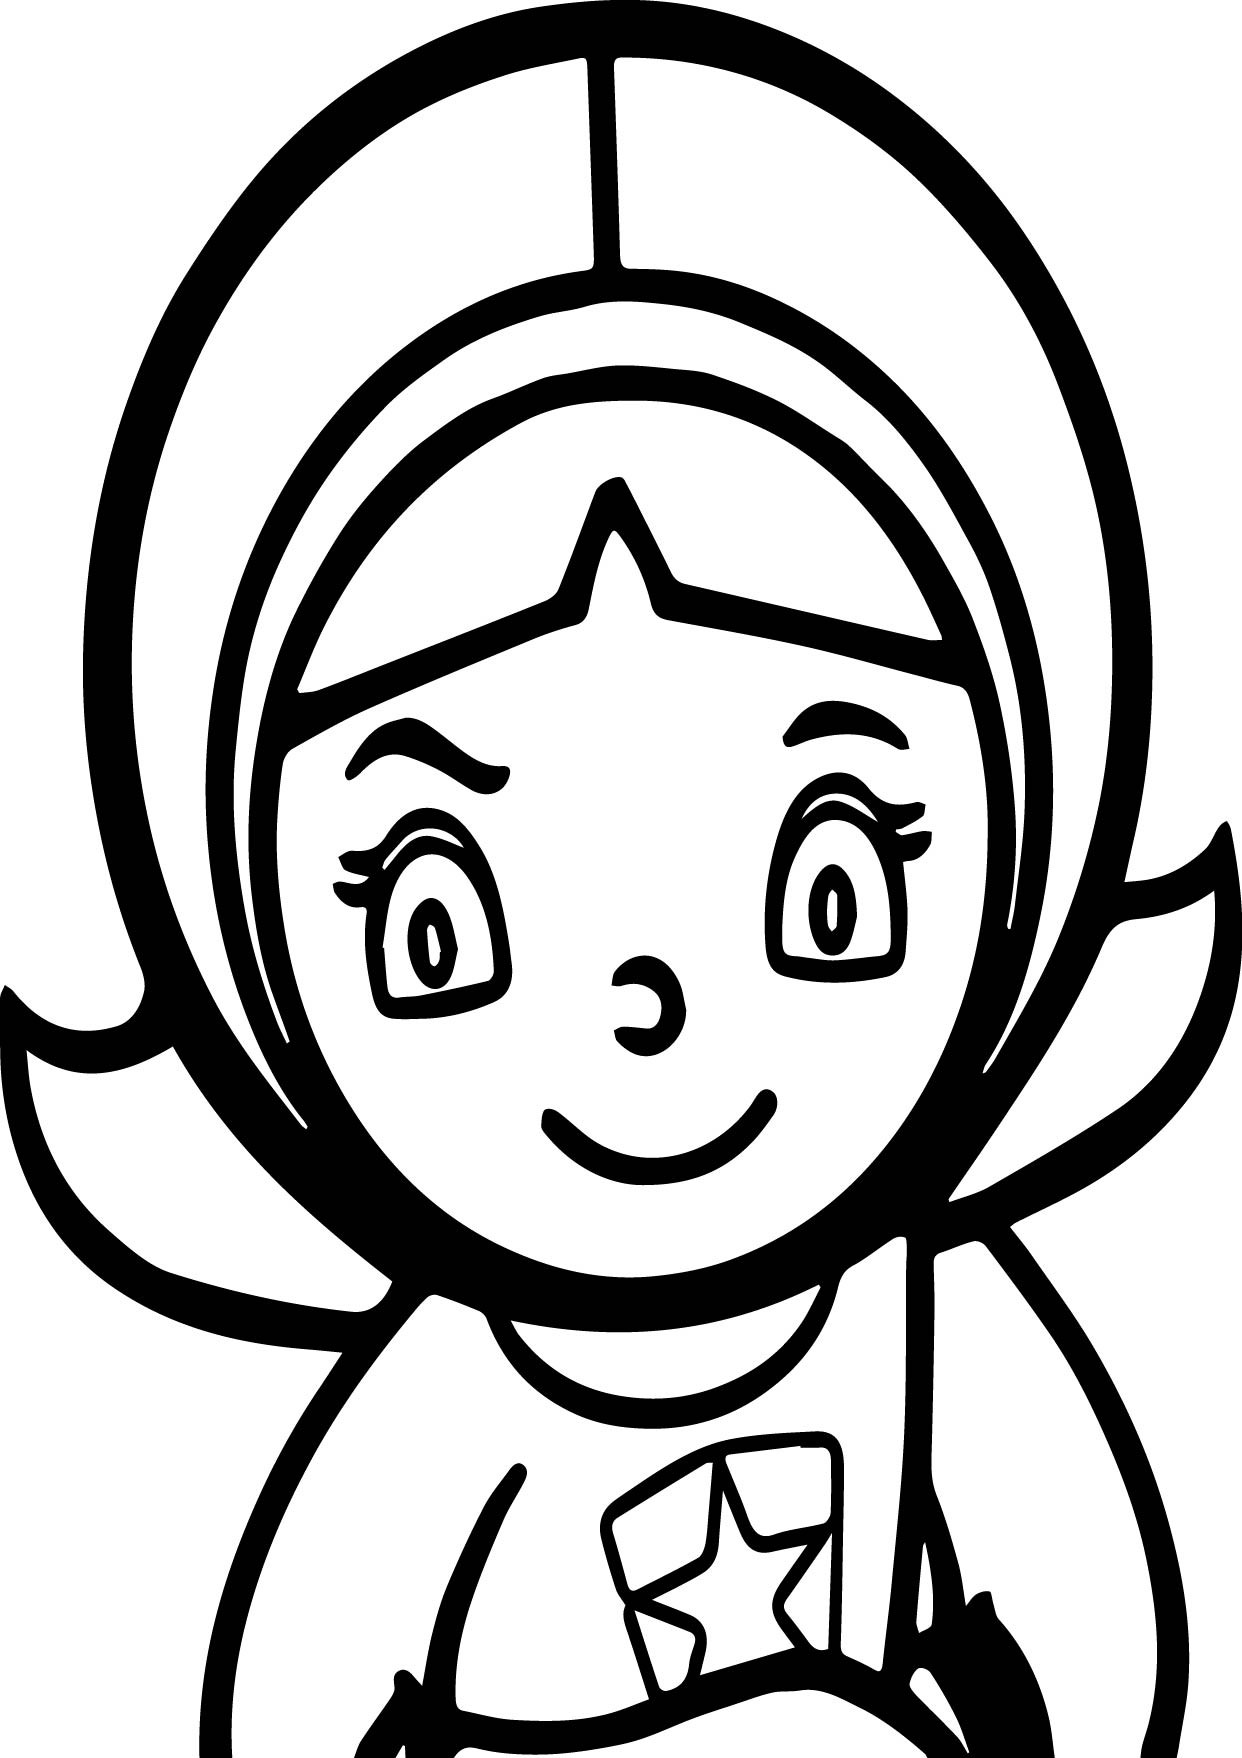 Pbskids.Org Coloring Pages
 Microsoft Word Page Border Clip Art Sketch Coloring Page